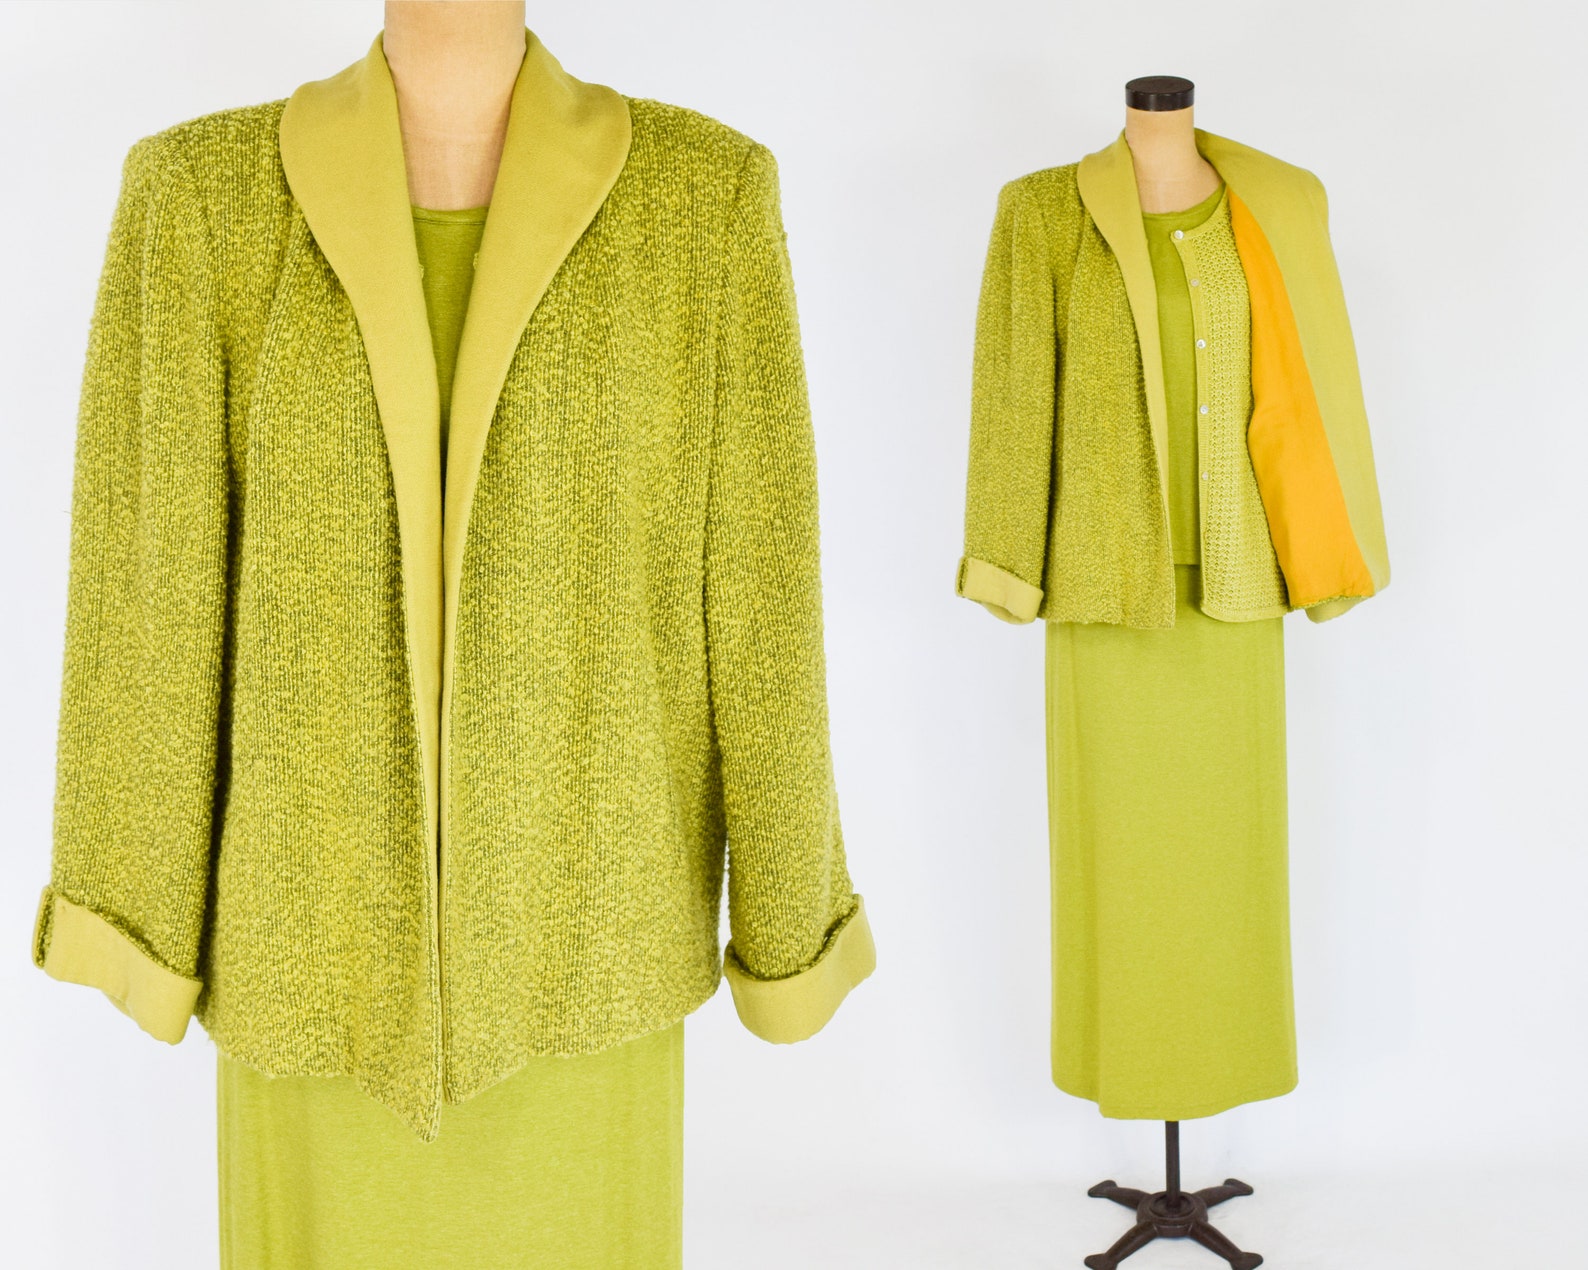 1940s Chartreuse Green Boucle Jacket 1990s Olive Green Skirt | Etsy